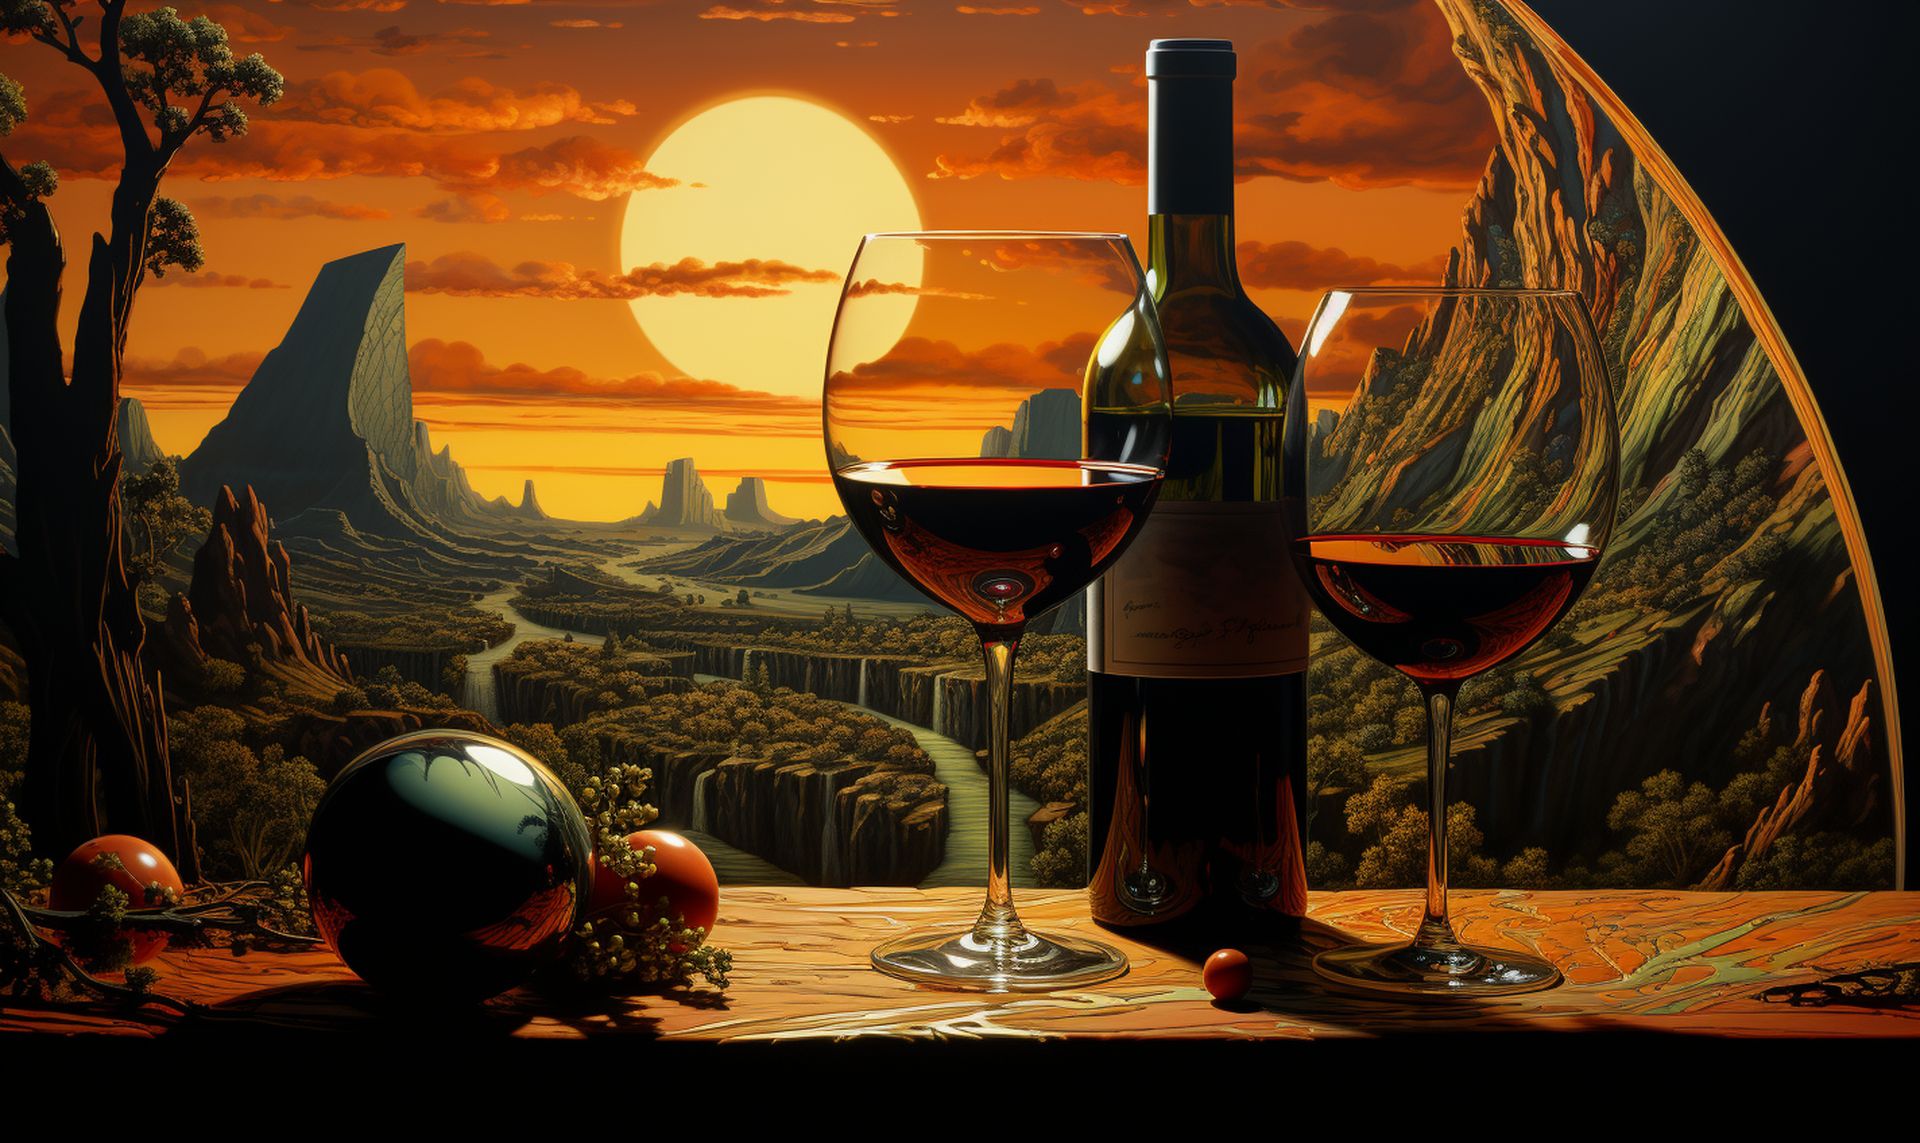 An artistic depiction of a wine bottle and glass from the best California wines of 2023